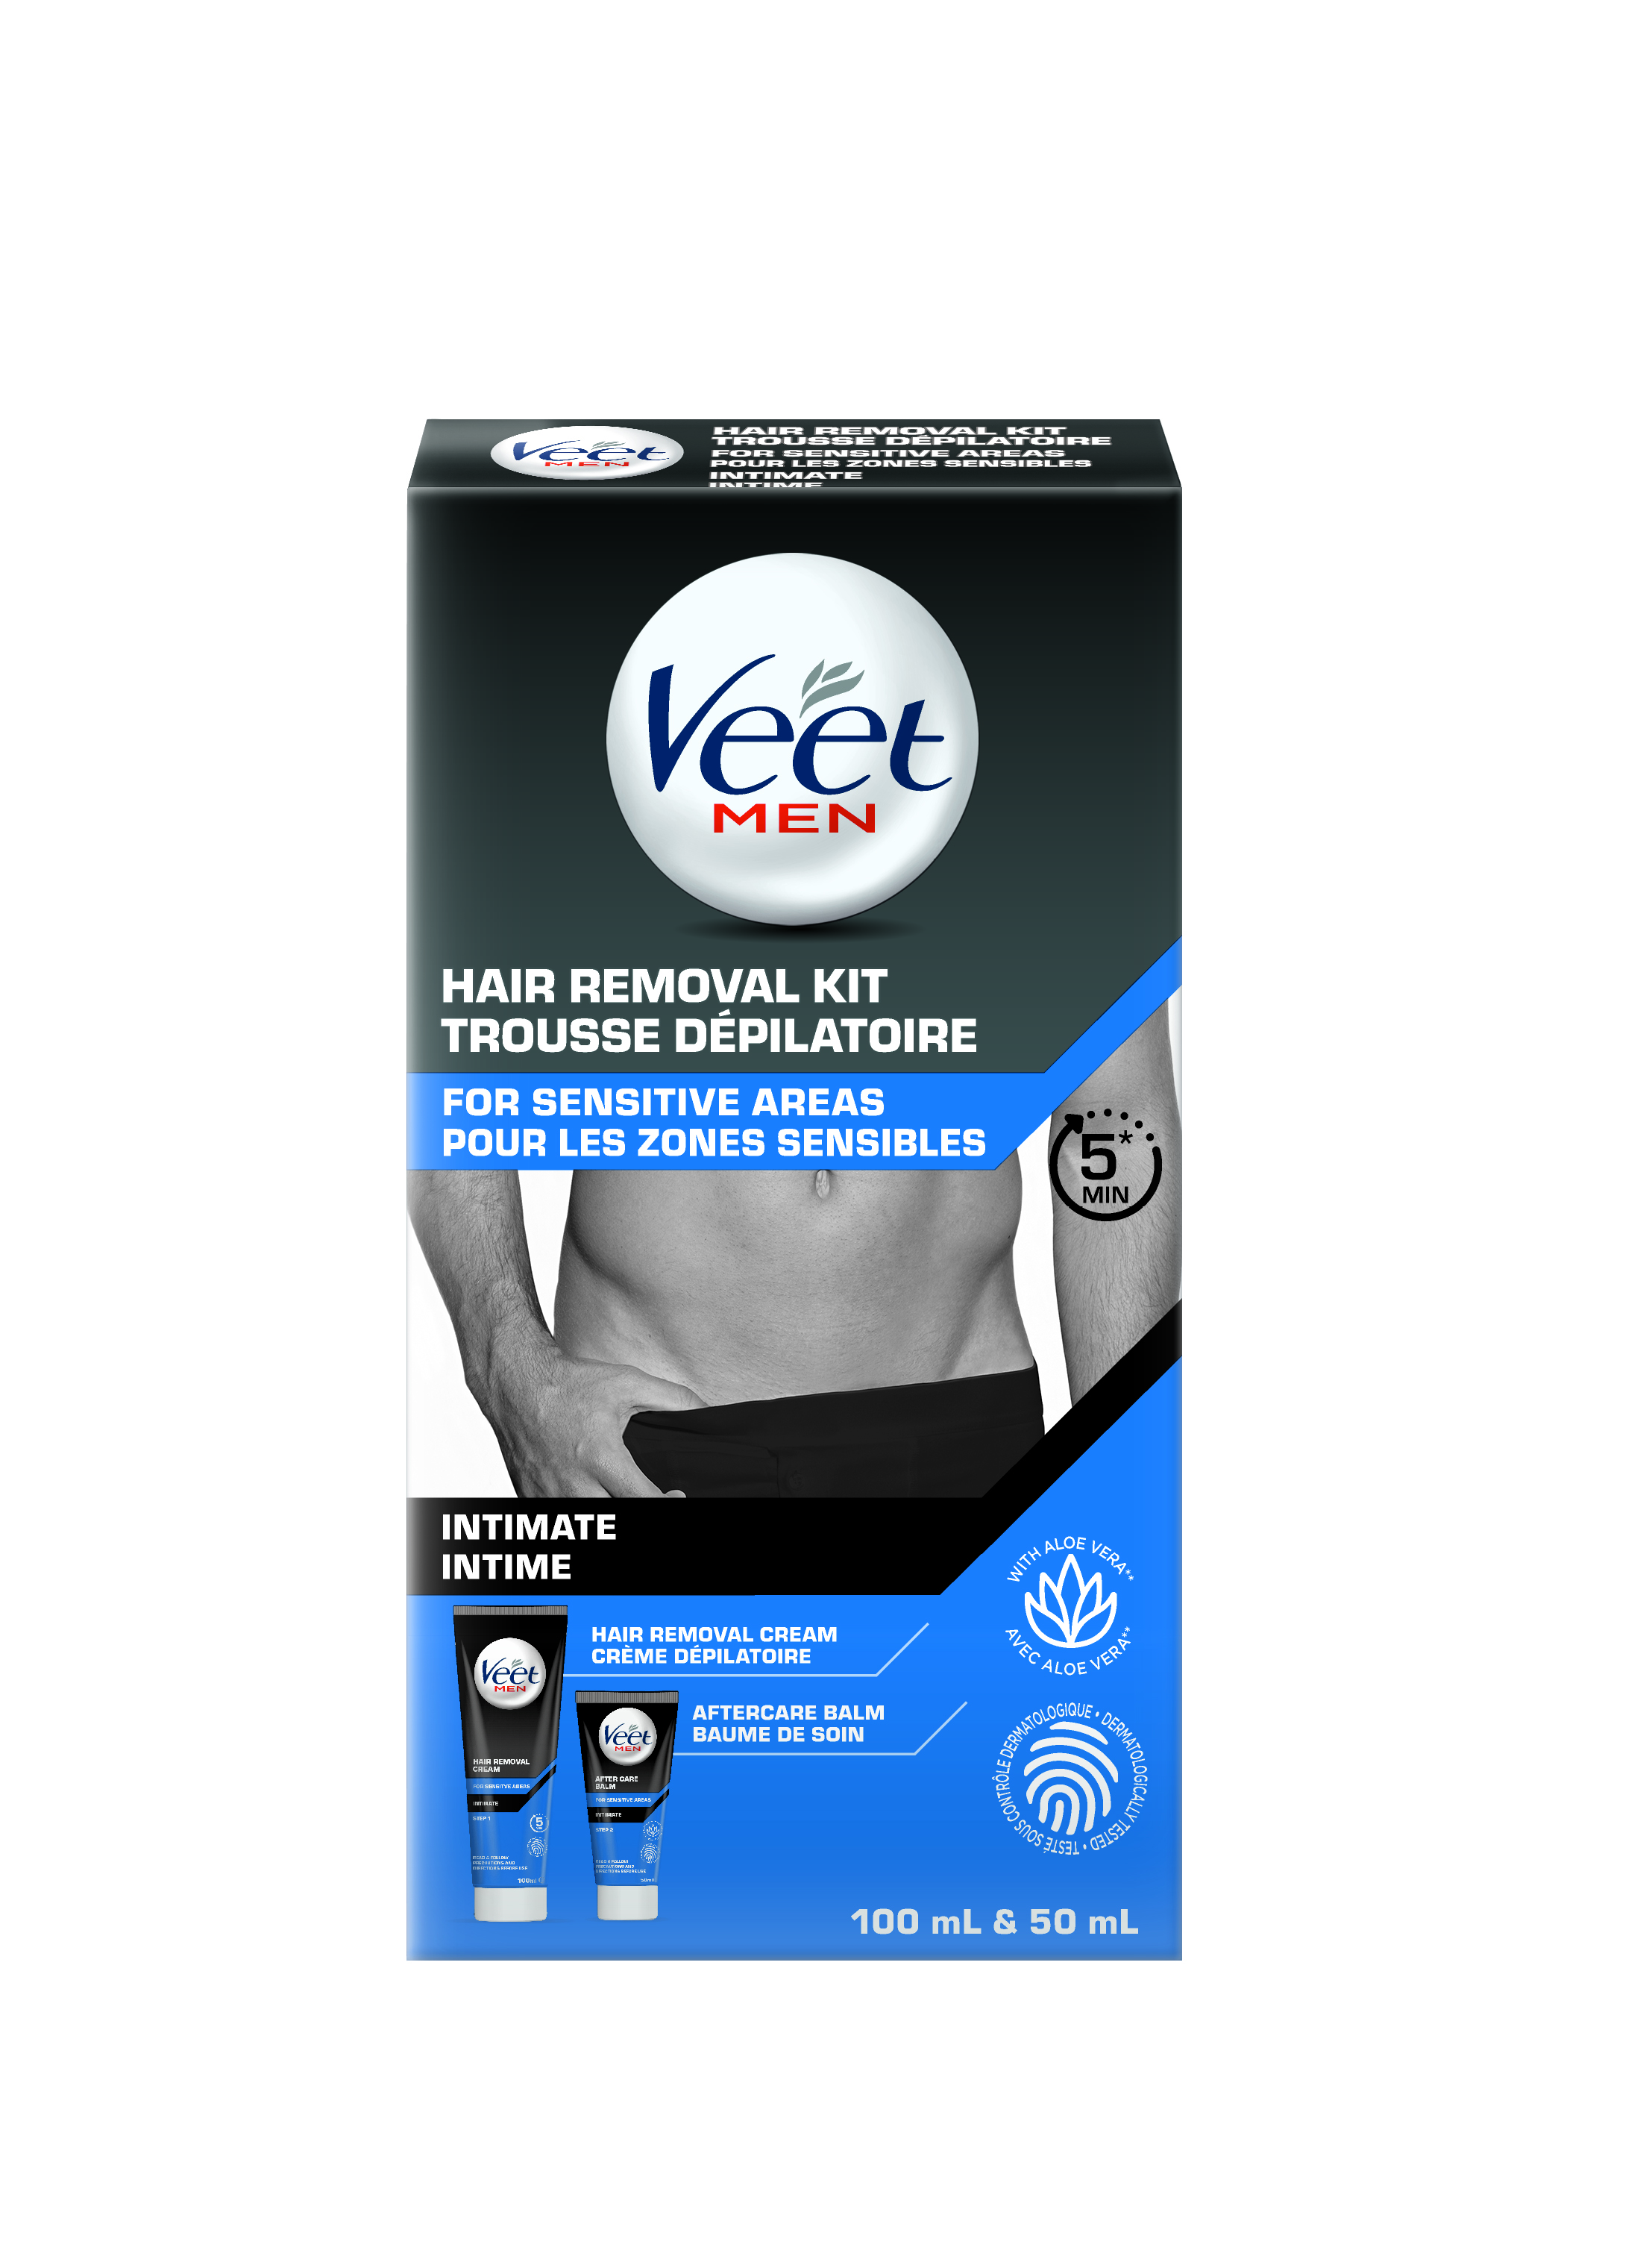 Veet® Intimate Hair Removal Kit - Men (Canada) - Aftercare Balm